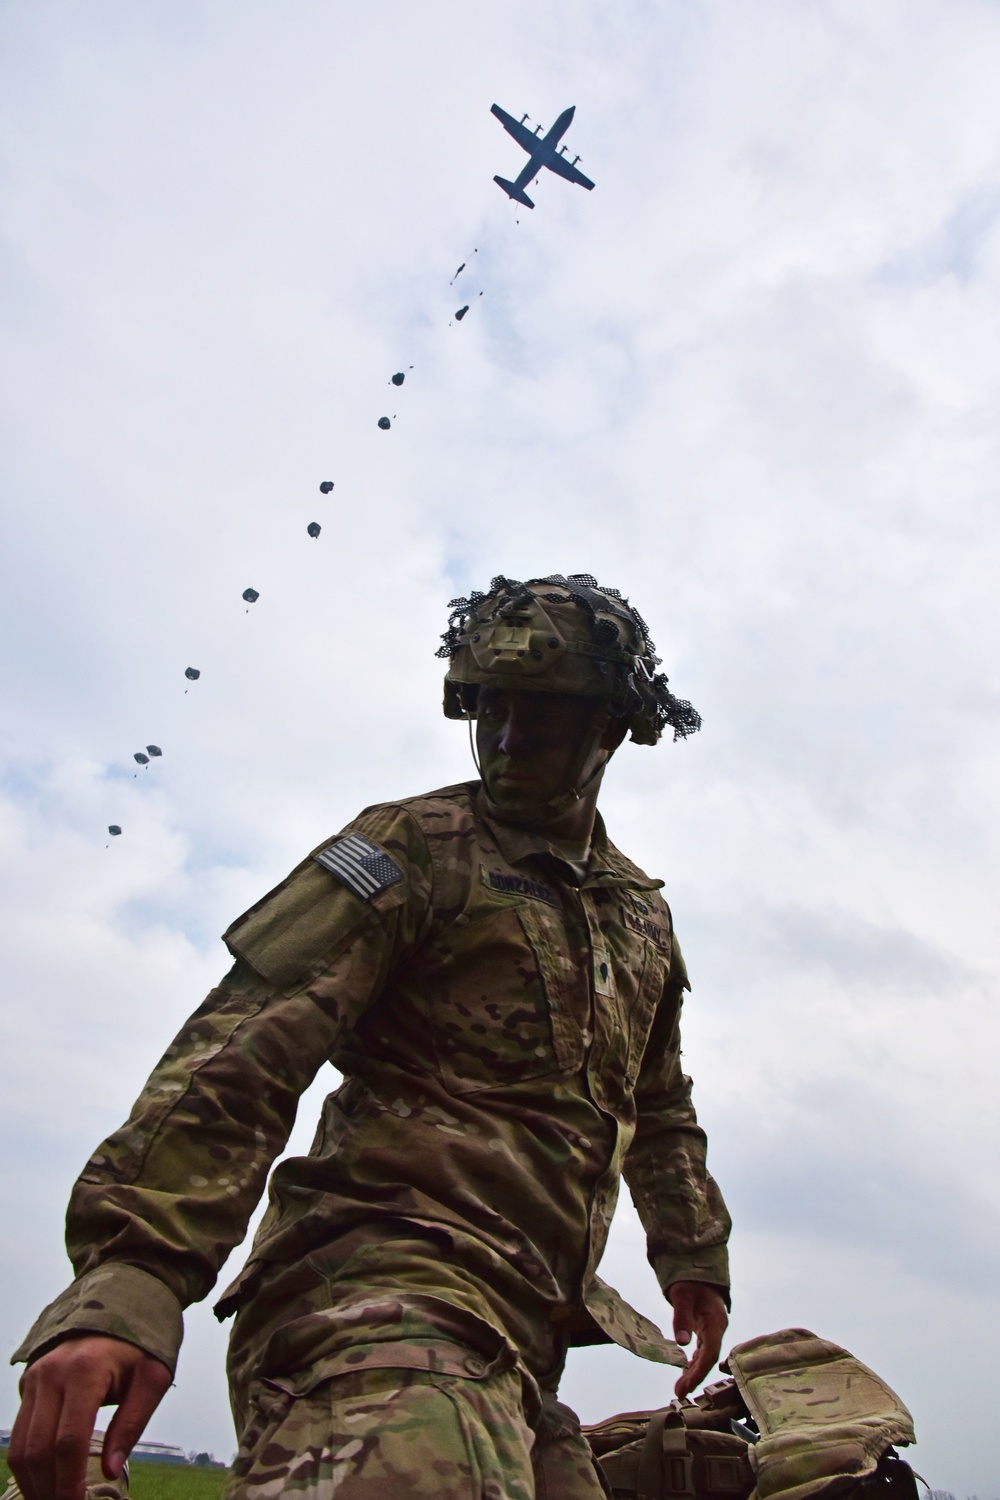 173rd Airborne jumps into Juliet Drop Zone